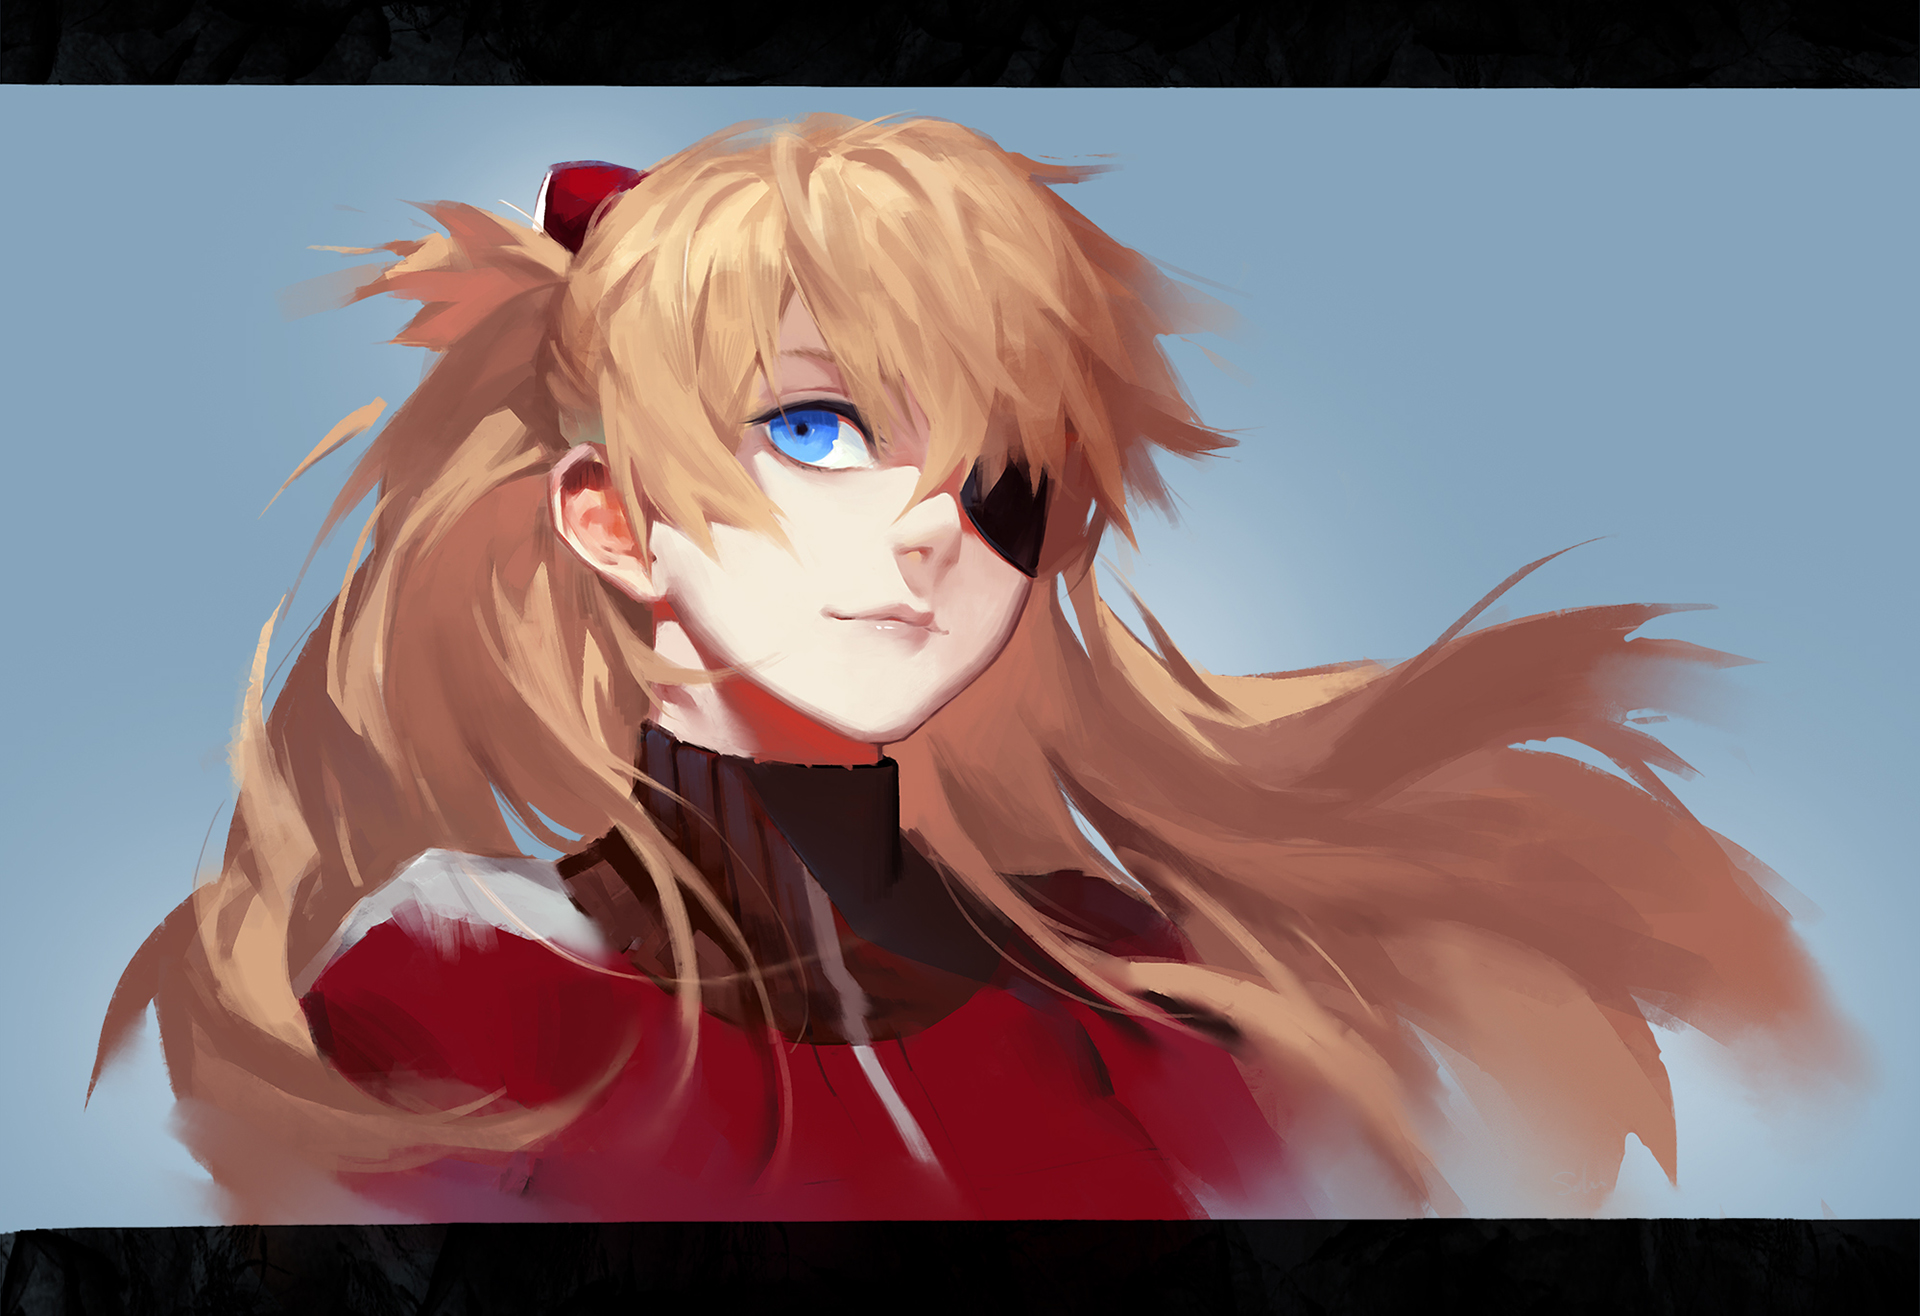 Anime 1920x1316 anime girls Asuka Langley Soryu Neon Genesis Evangelion 2D redhead smiling twintails blue eyes clear sky red jackets fan art eyepatches